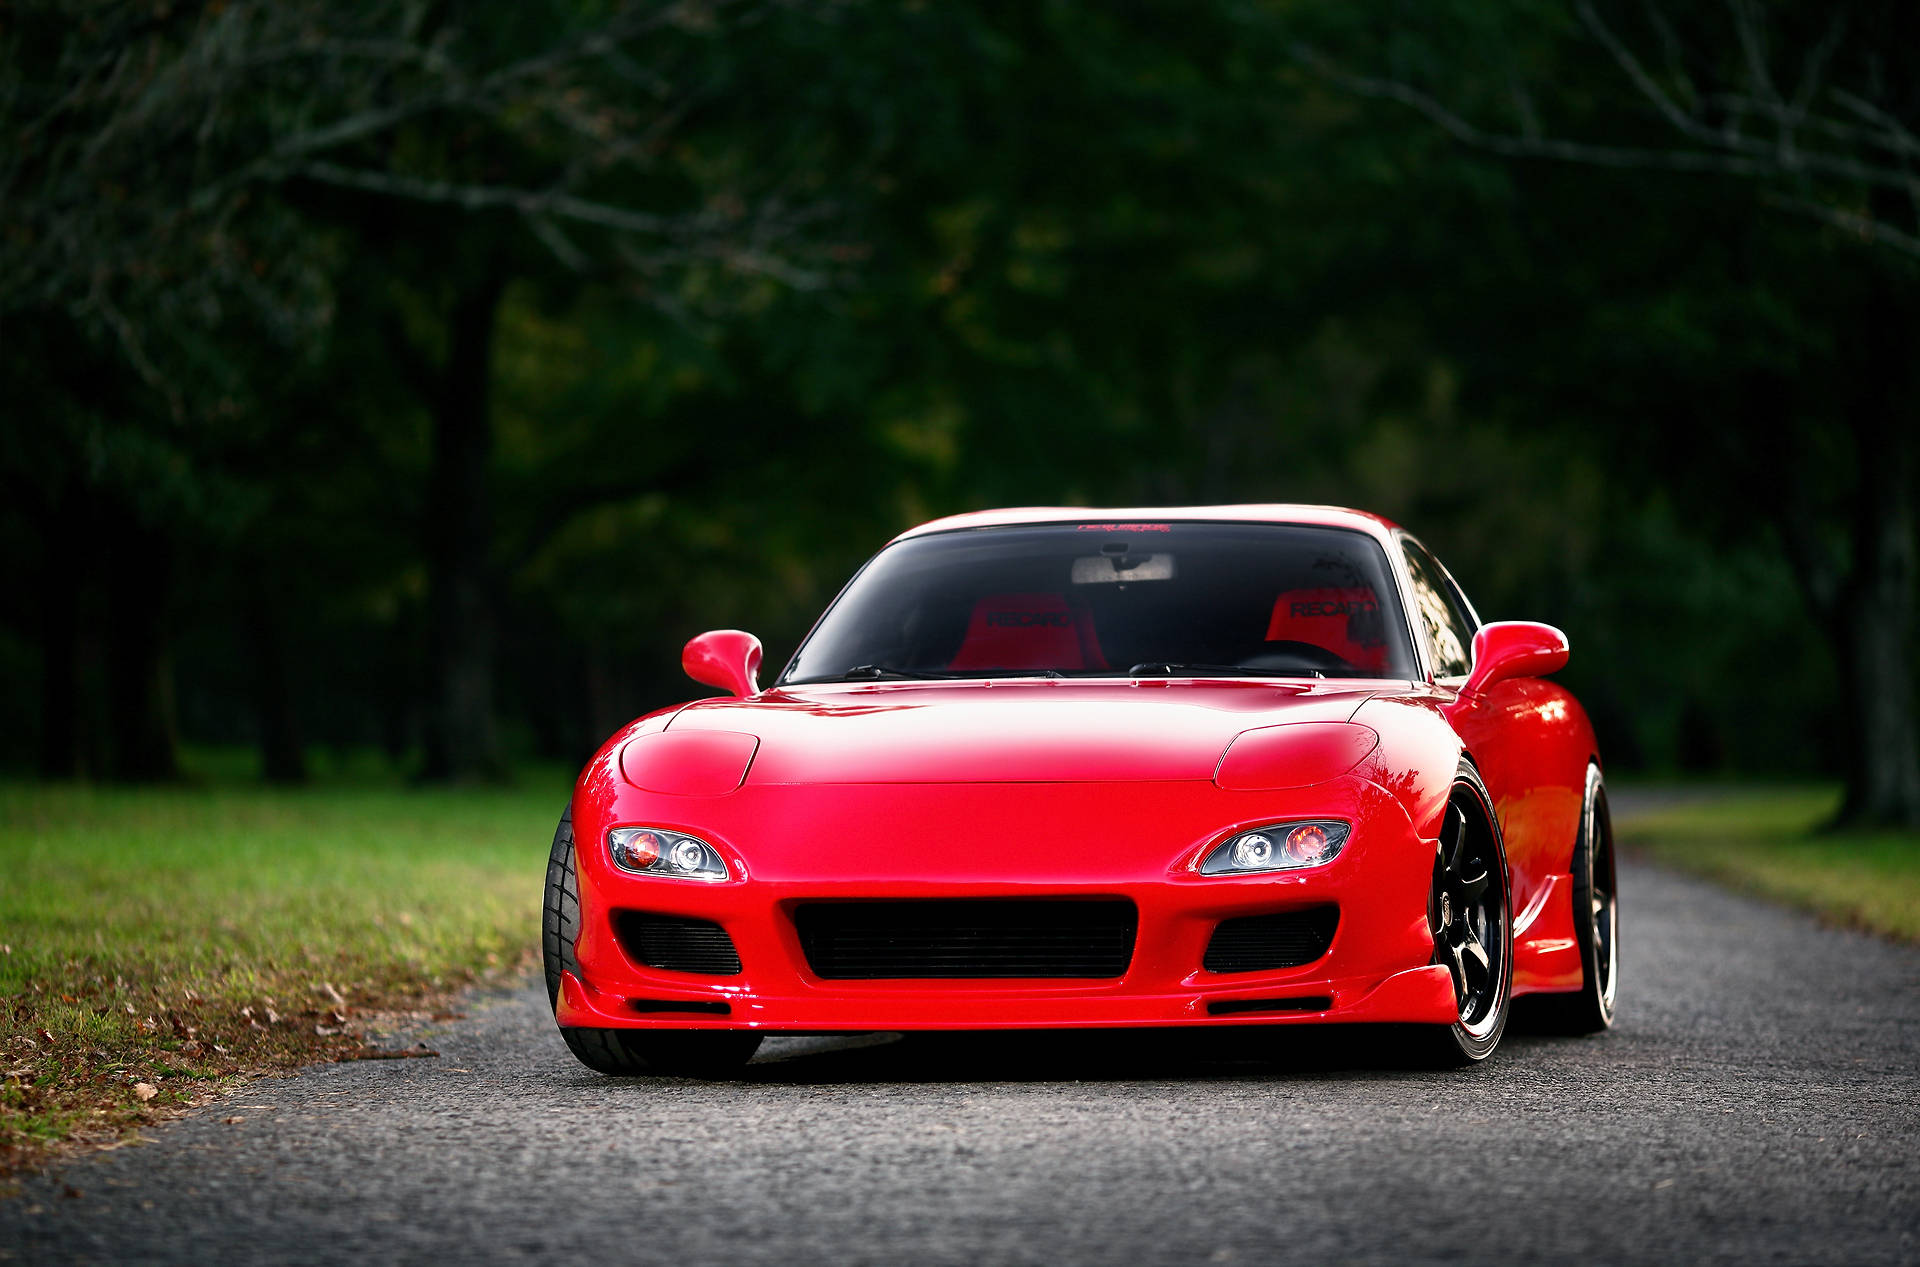 Bright Red Rx7 Car Background